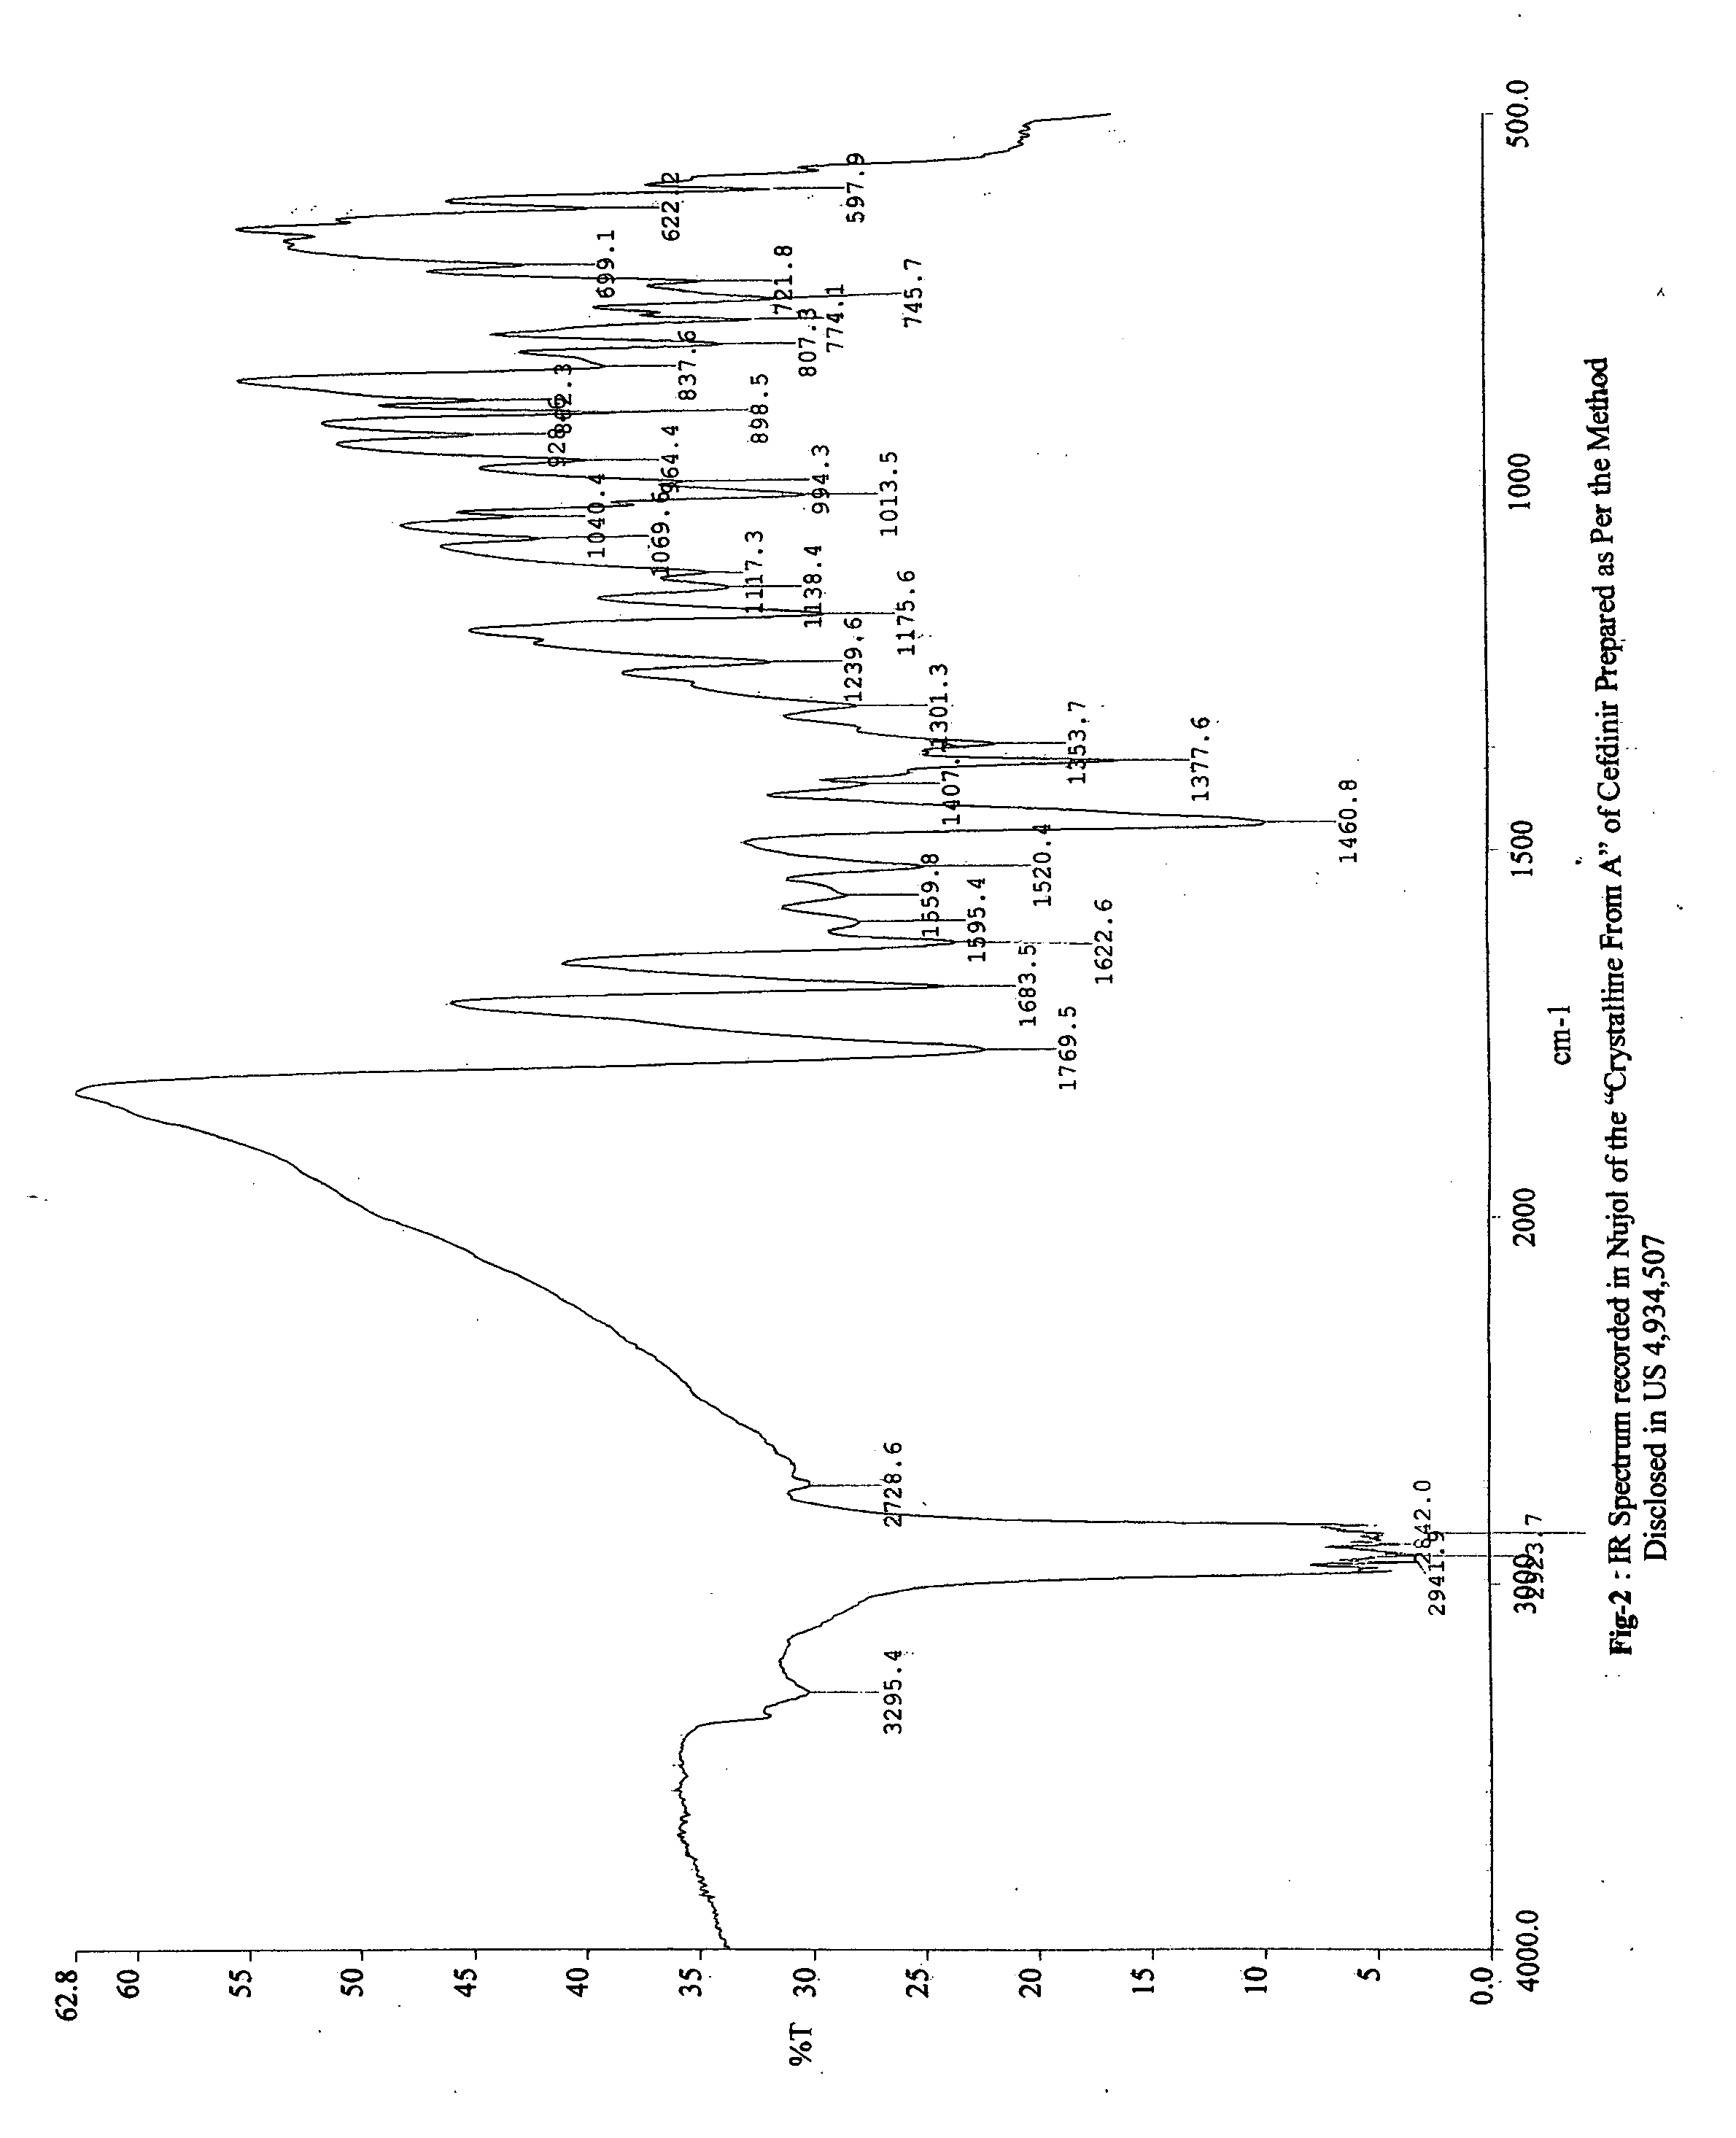 Stable bioavailable crystalline form or cefdinir and a process for the preparation thereof